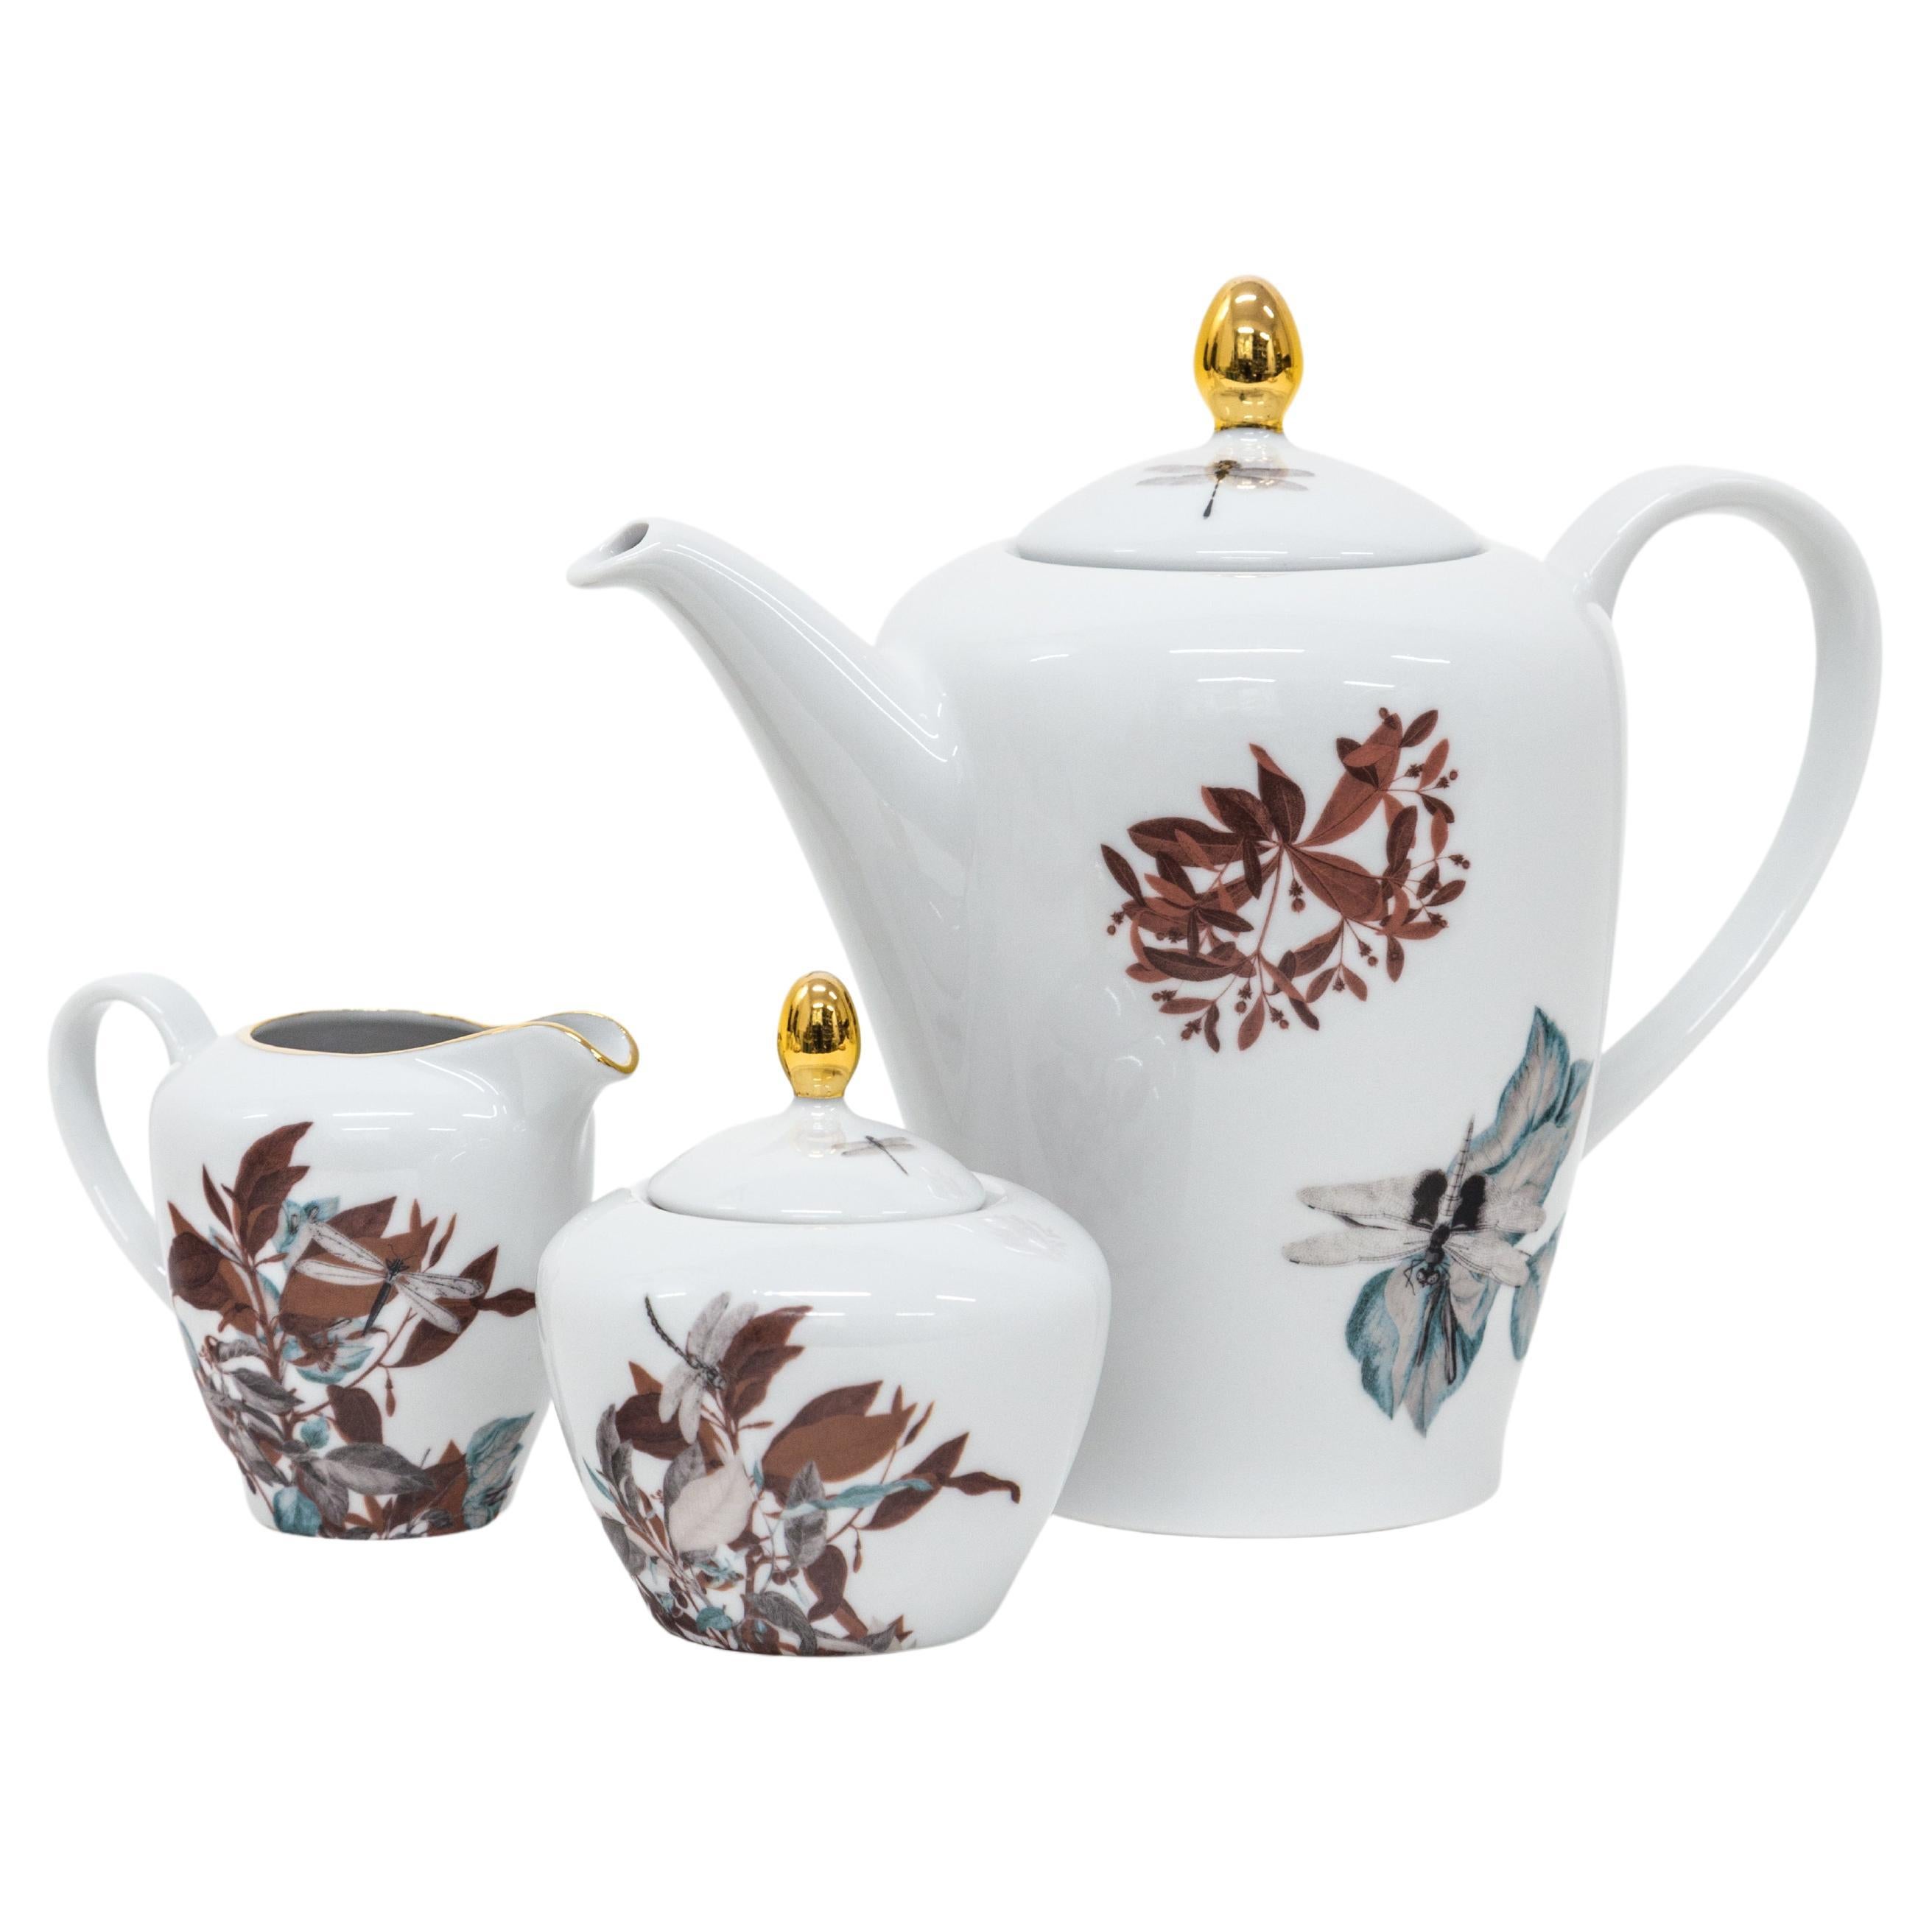 Black Dragon POOL, Contemporary Decorated Porcelain Tea Time Set by Vito Nesta For Sale